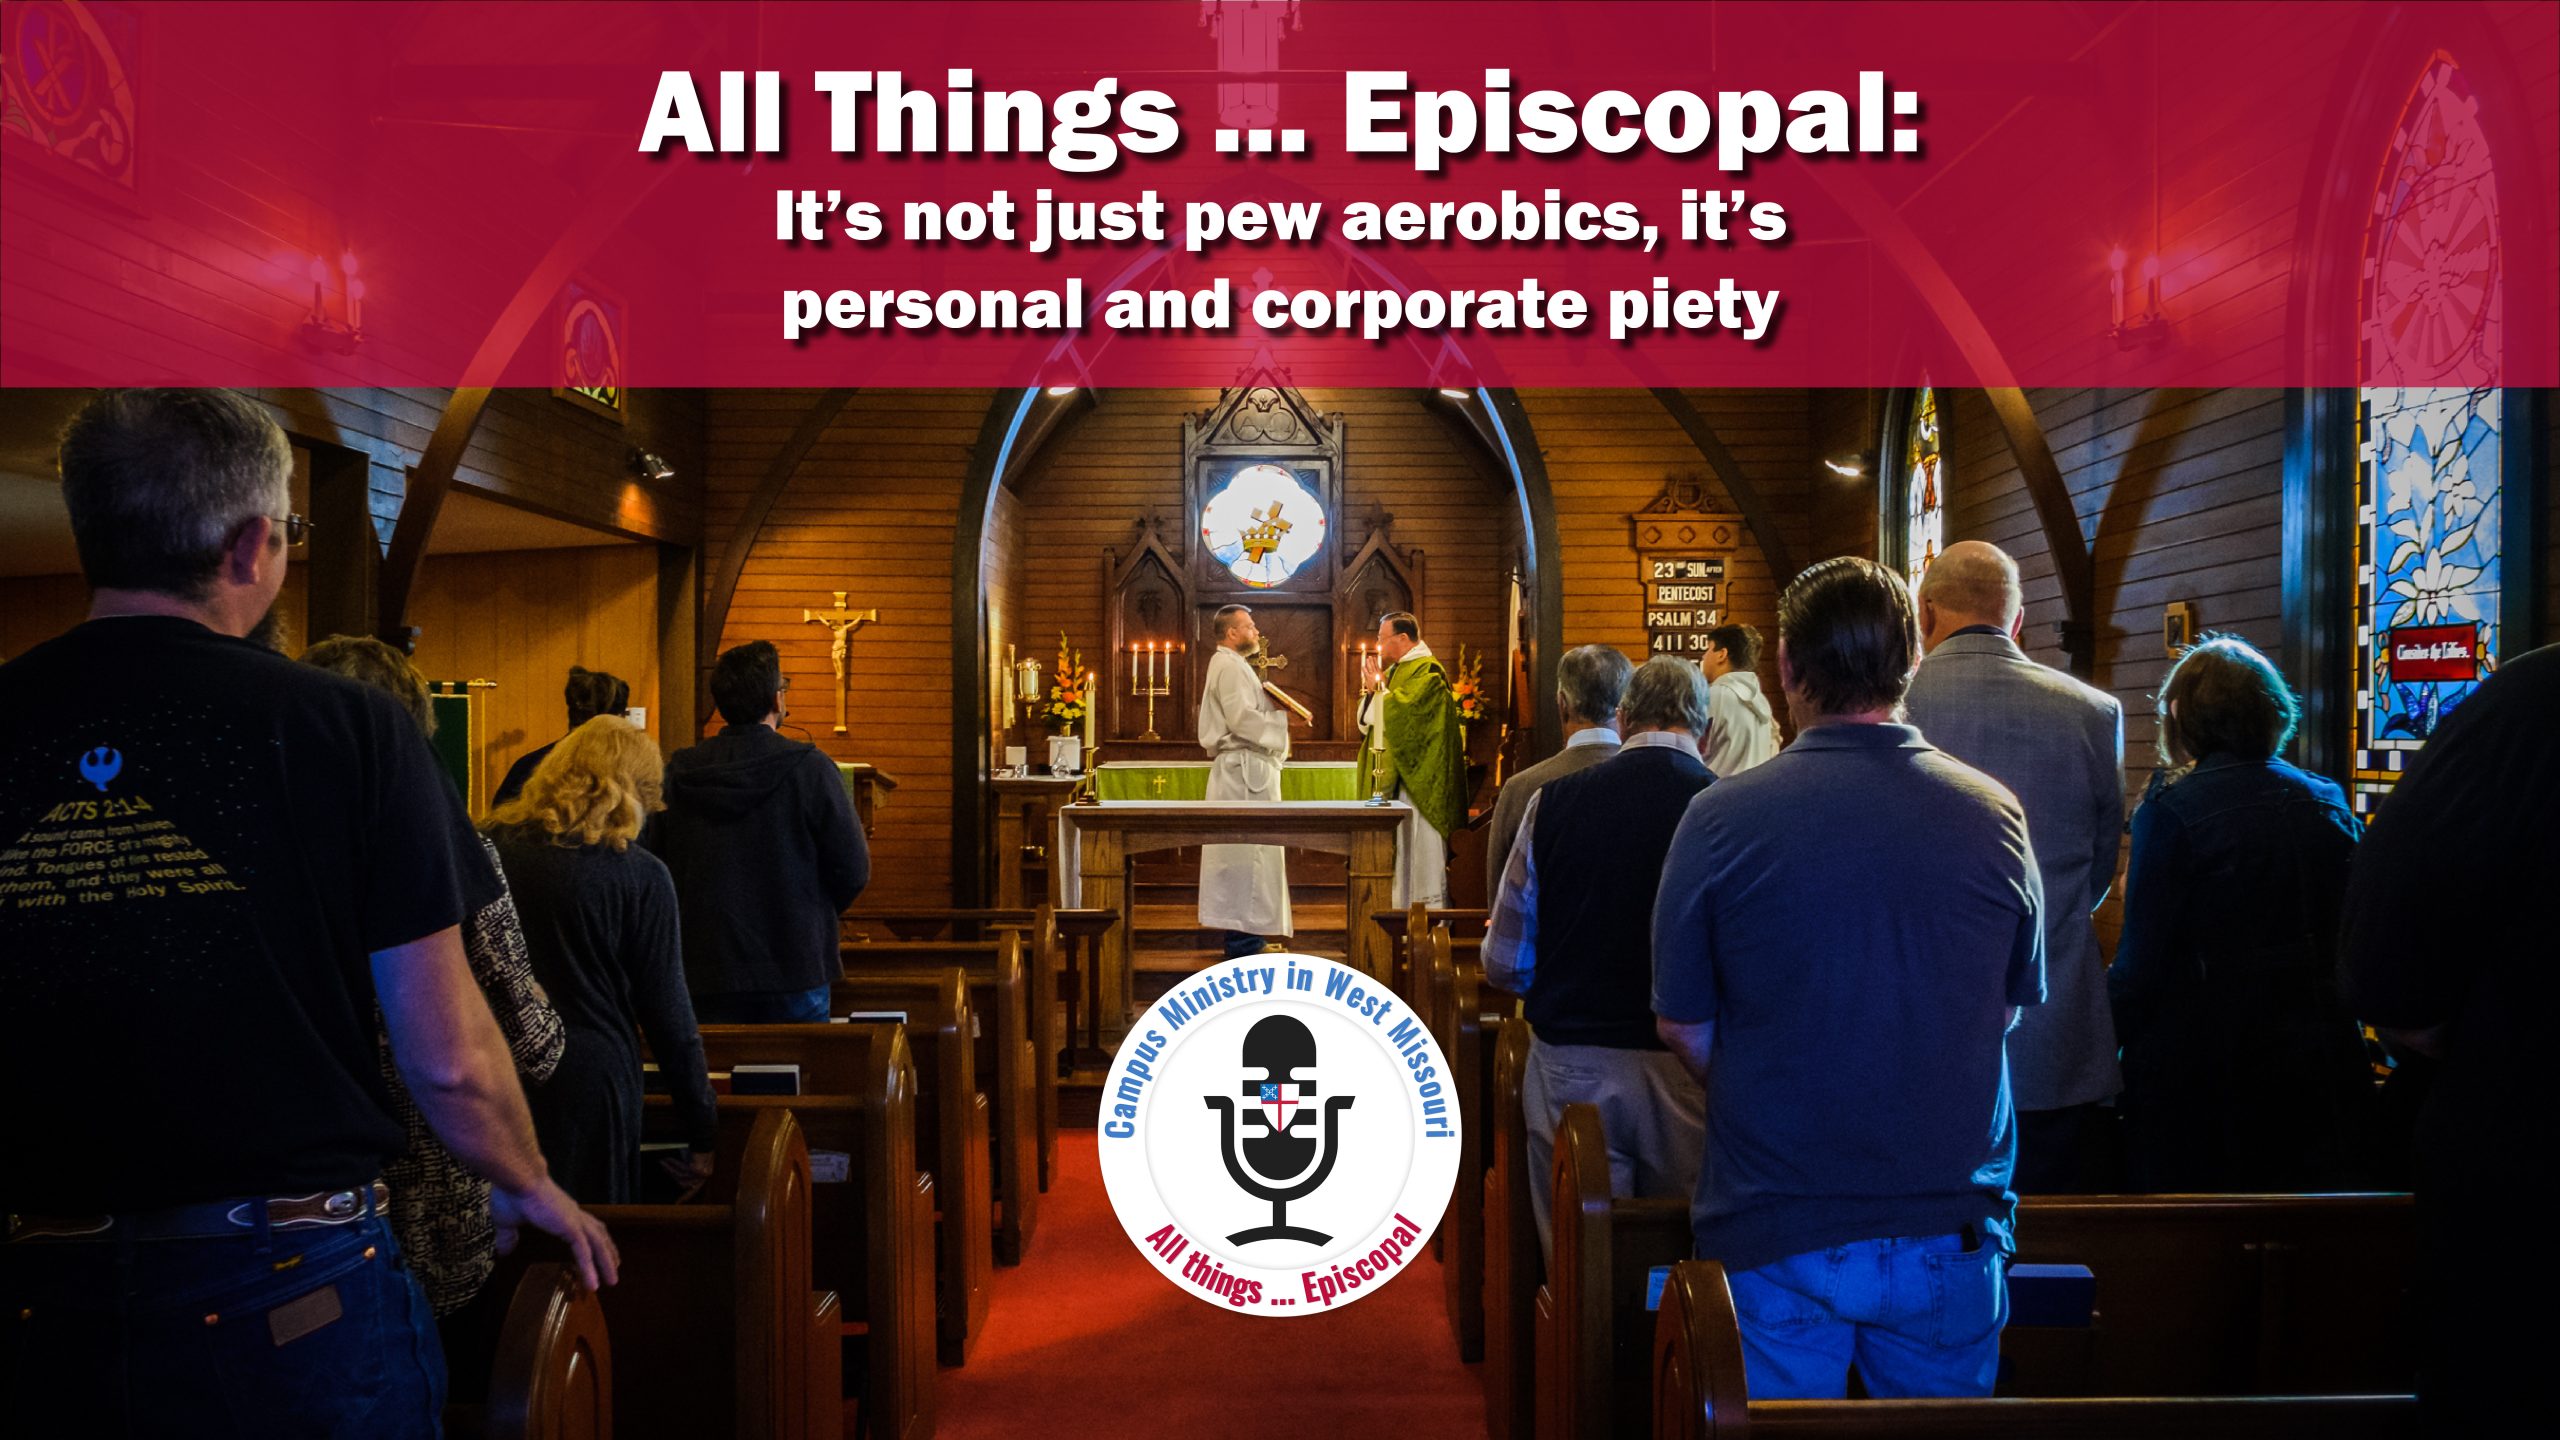 All Things … Episcopal: It’s not just pew aerobics, it’s personal and corporate piety